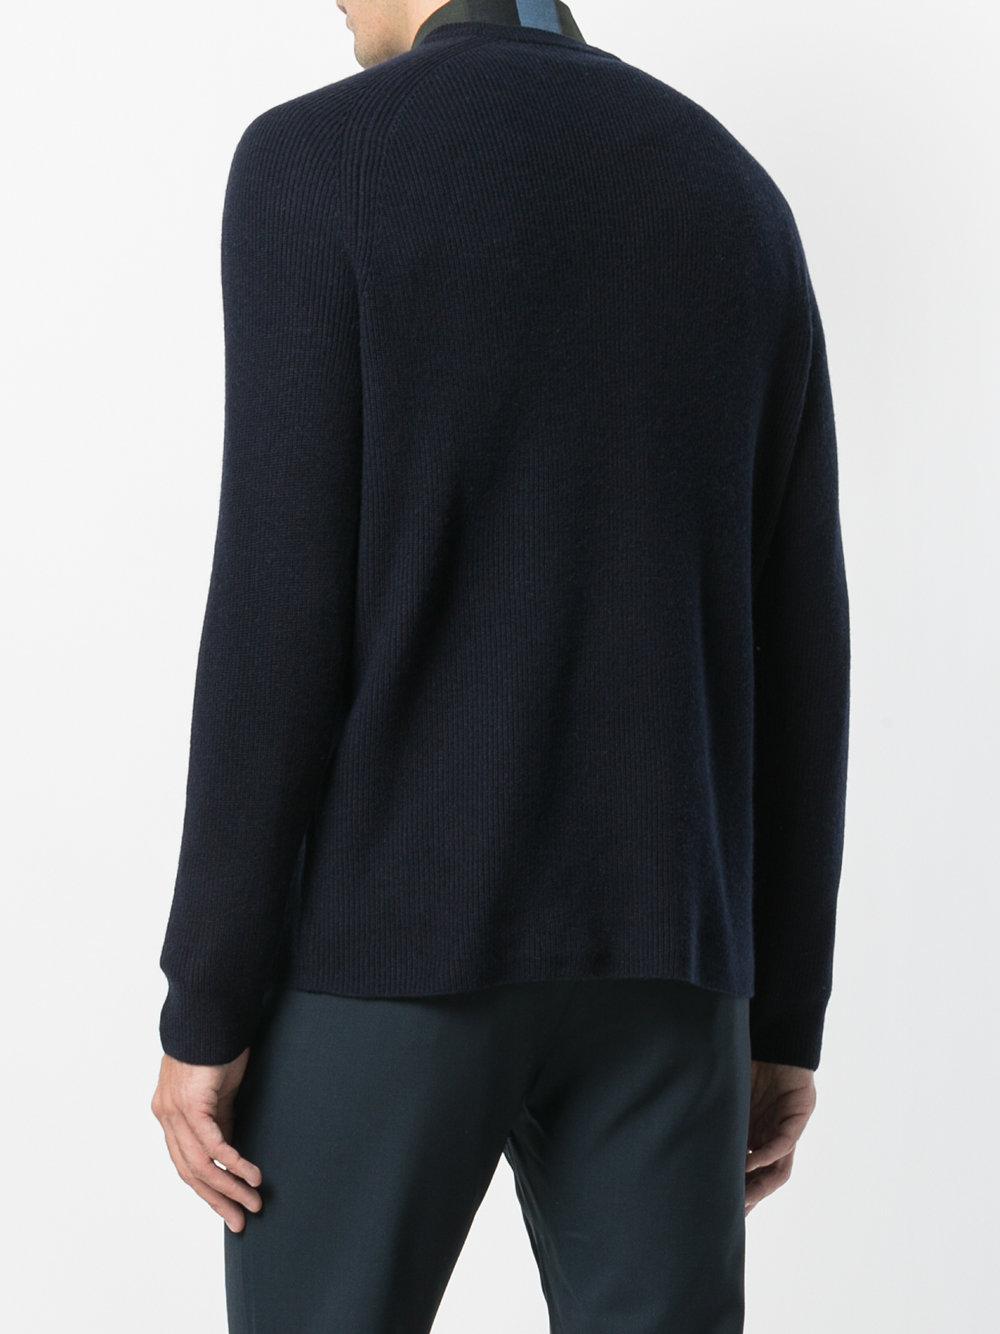 Theory Cashmere Ribbed Raglan Sweater in Blue for Men - Lyst